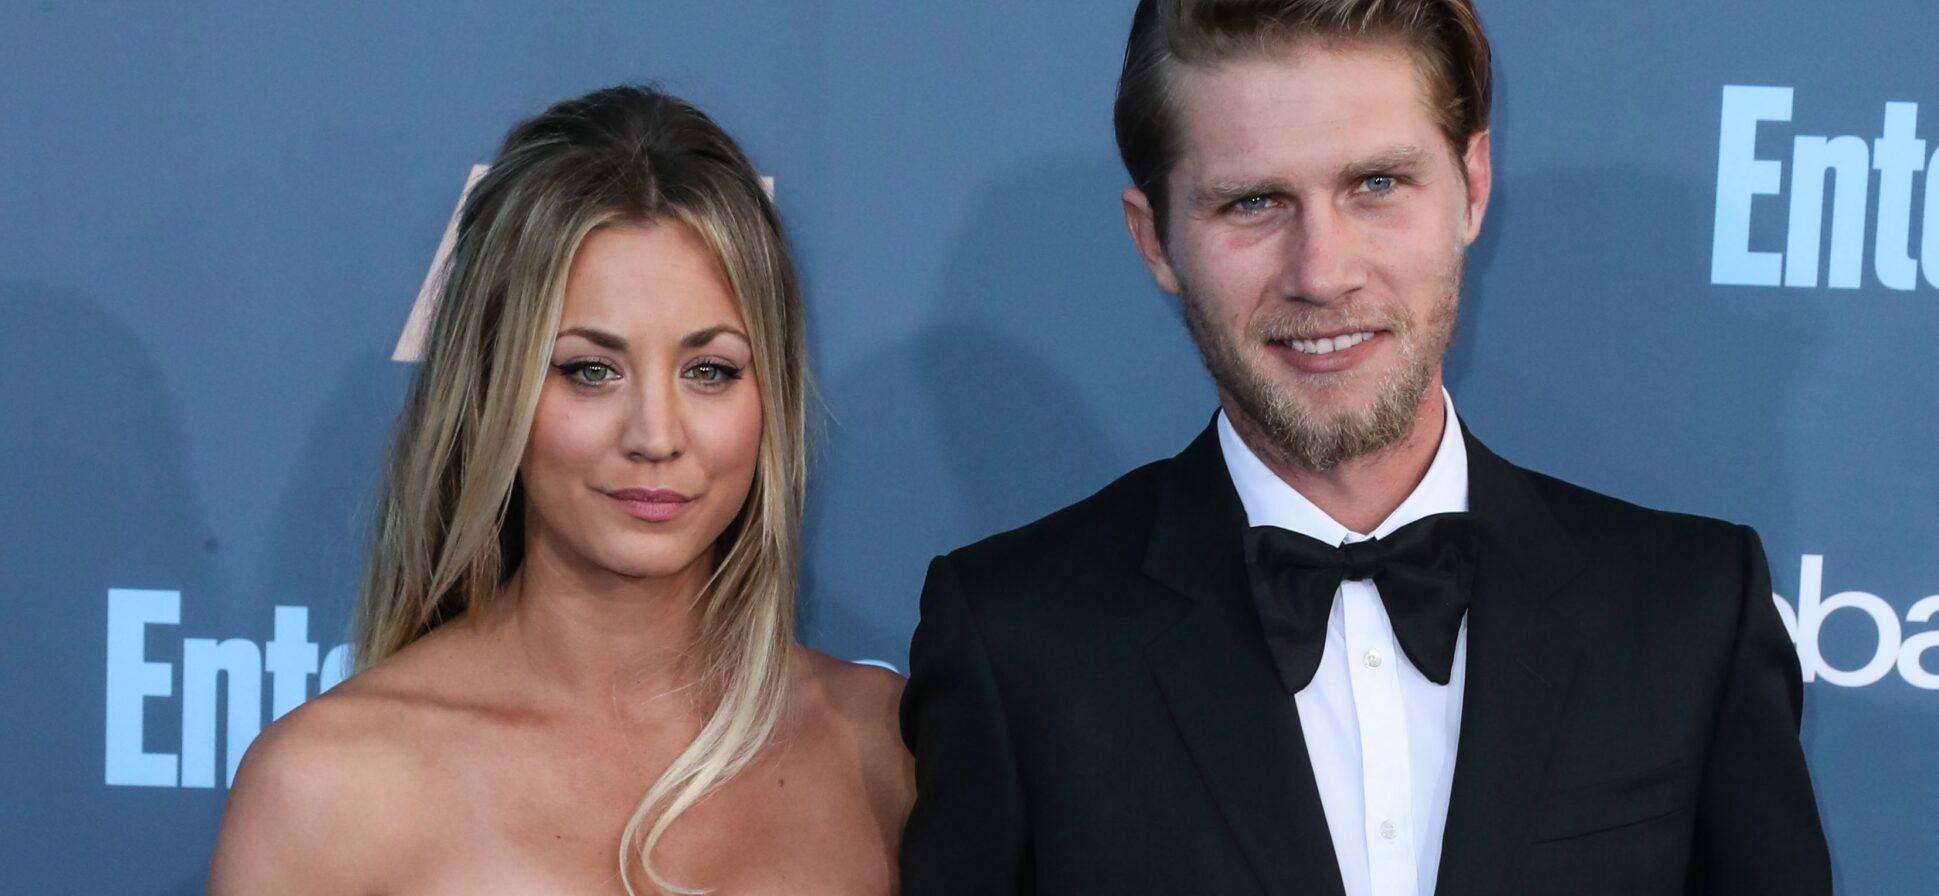 Is Kaley Cuoco Dating Following Her Divorce From Ex-Husband Karl Cook?